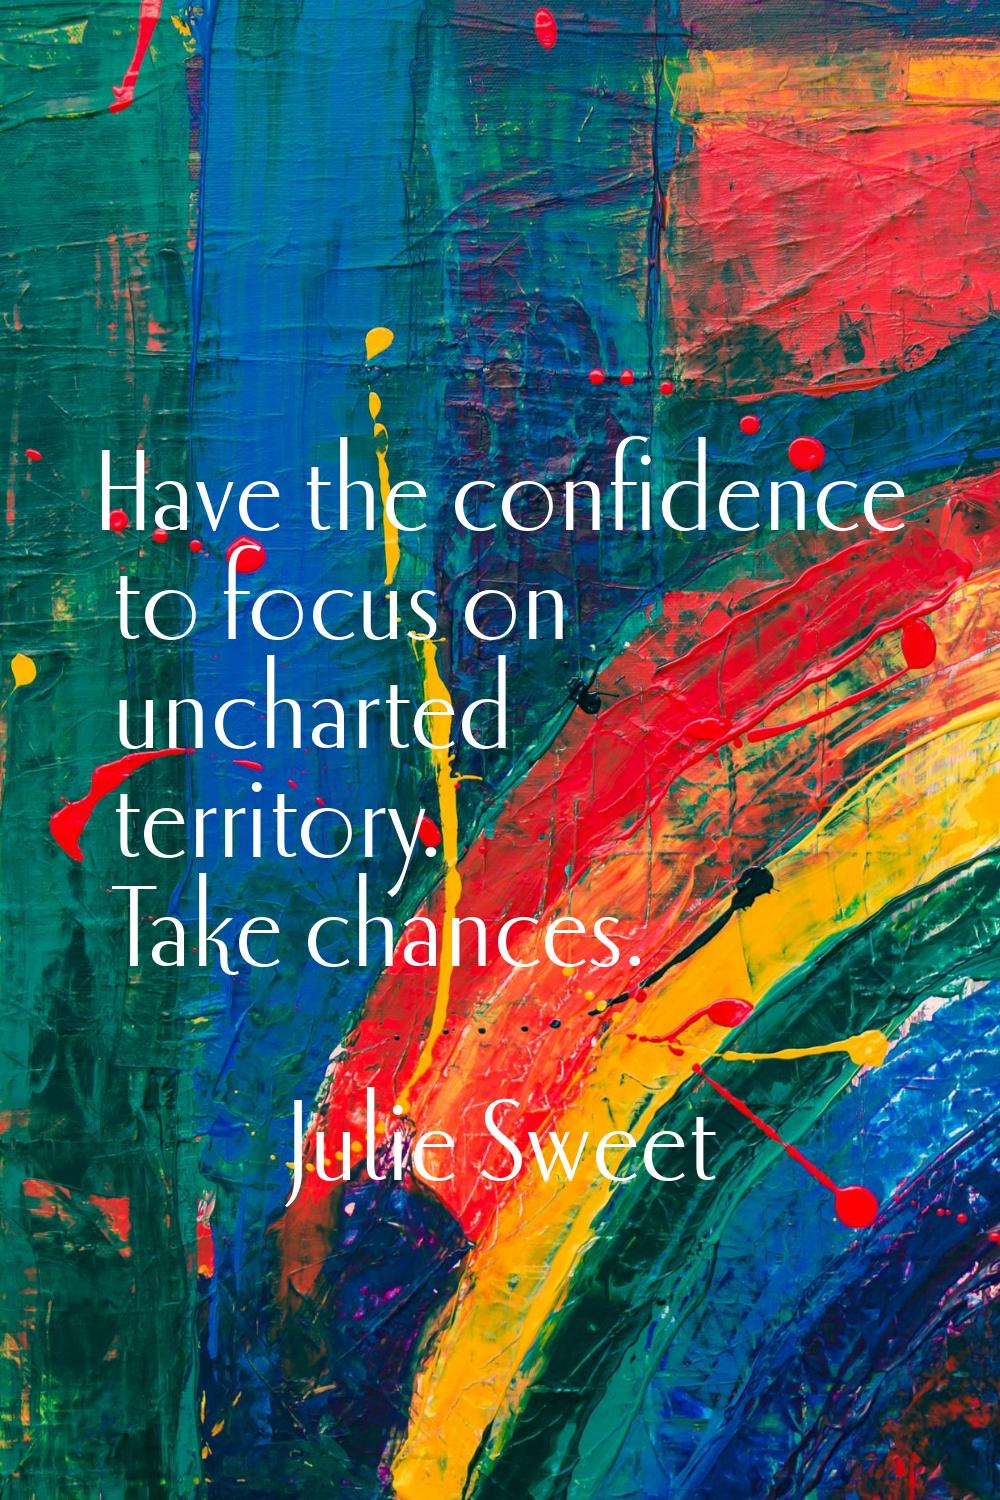 Have the confidence to focus on uncharted territory. Take chances.